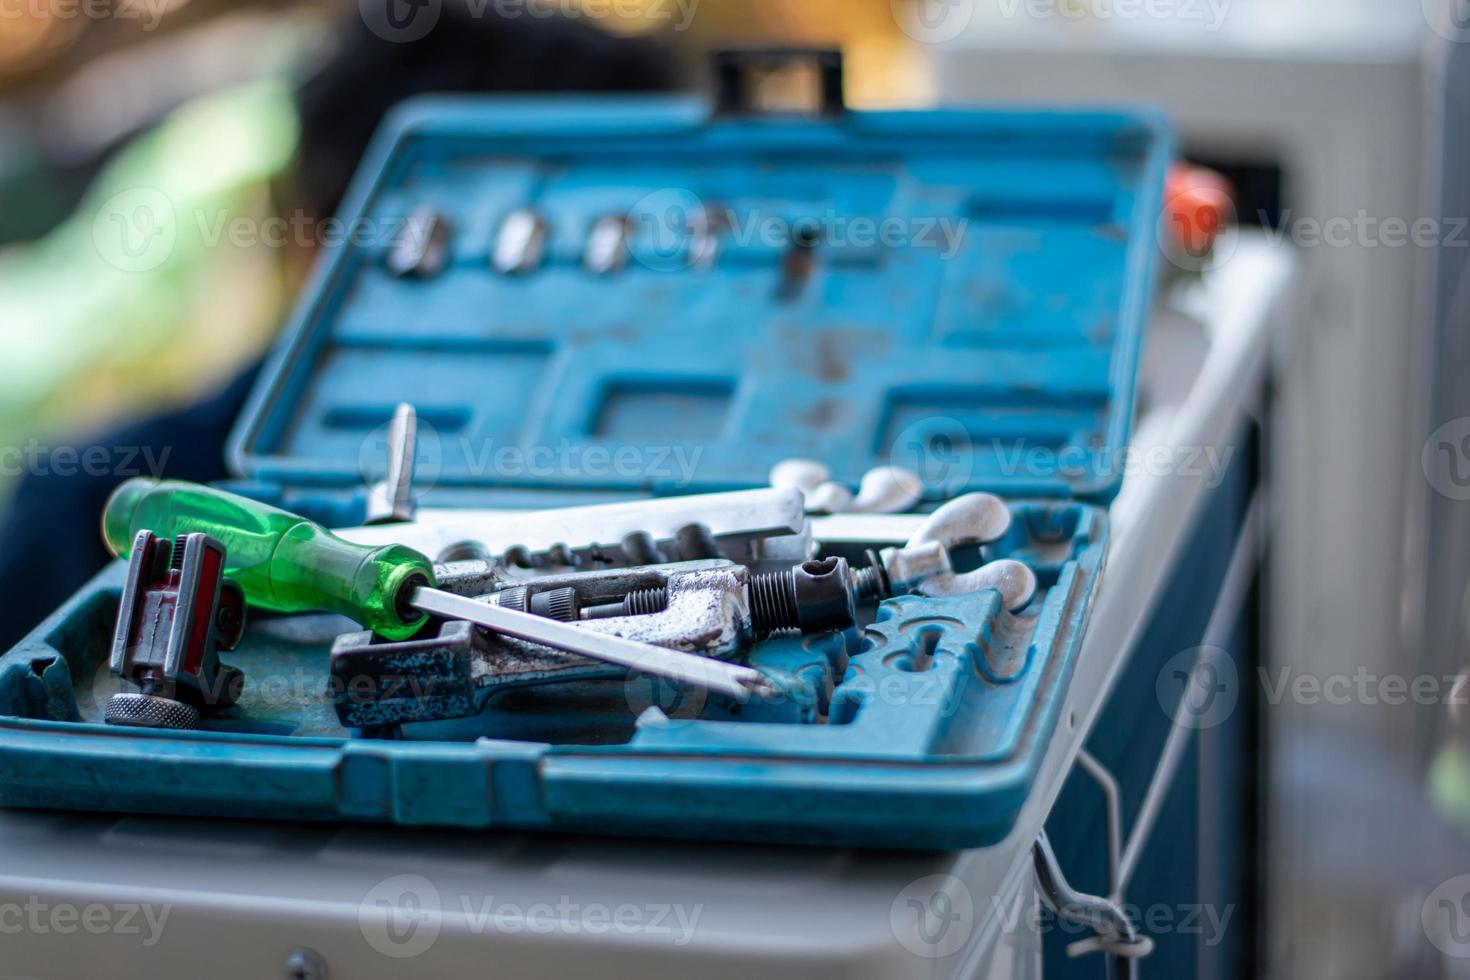 Hand tools or tool boxes to store wrench, pliers, screwdrivers, screws, bolts and more. To do yourself. photo